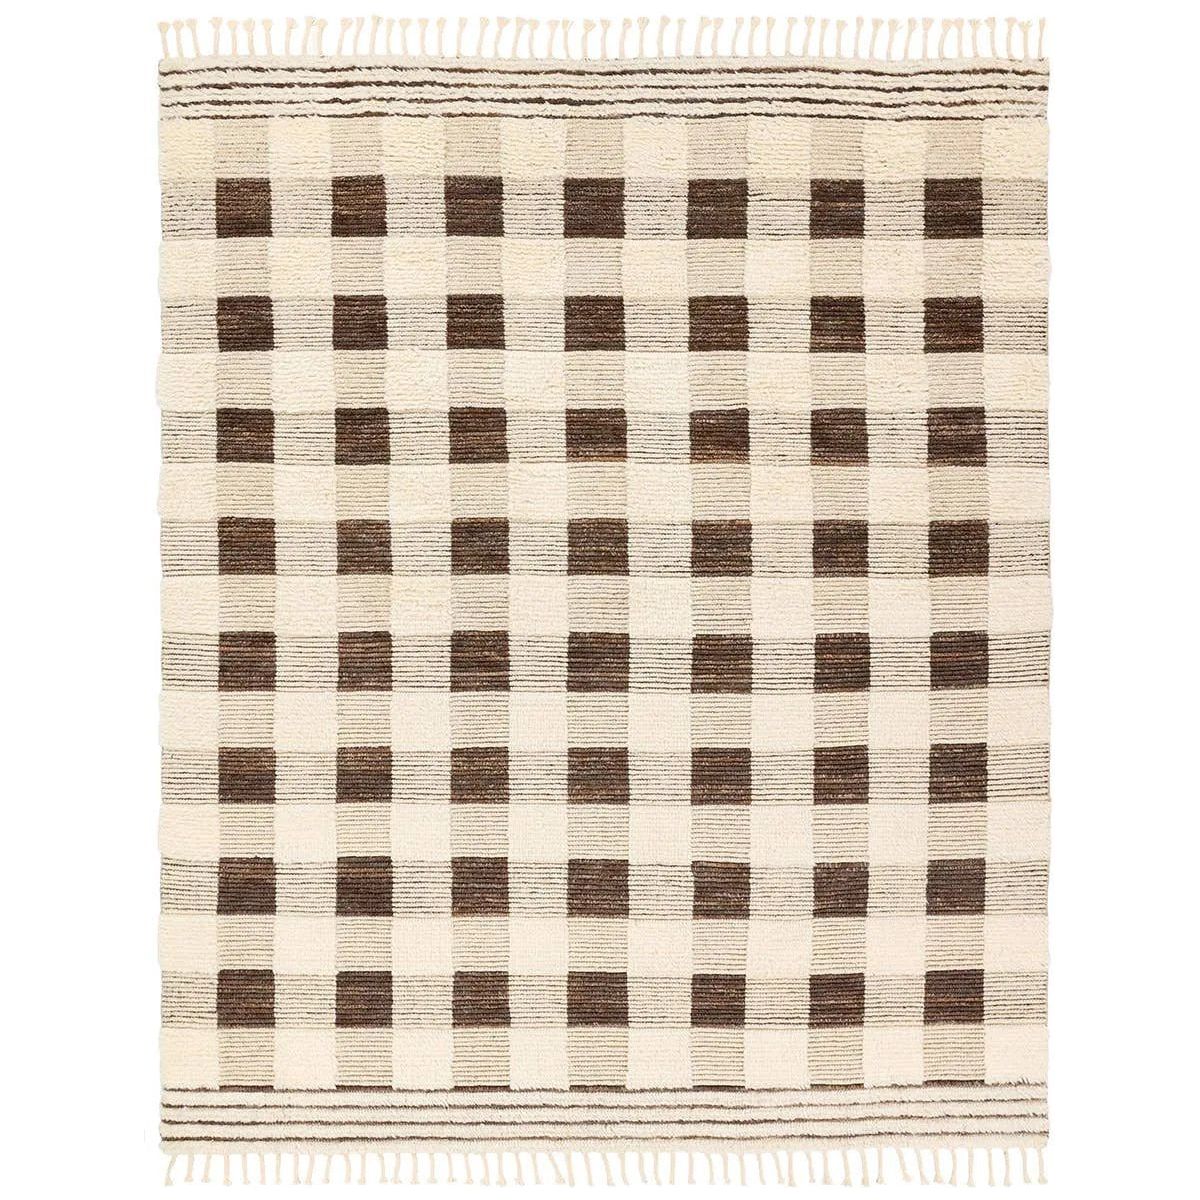 The Desouk Berkshire melds modern allure with the global vibes of Morocco. The Berkshire hand-knotted rug showcases a geometric grid pattern with contrasting brown, cream, and tan tones. This handcrafted rug boasts plush, cut wool pile that pairs beautifully with braided tassel details. Amethyst Home provides interior design, new home construction design consulting, vintage area rugs, and lighting in the Salt Lake City metro area.